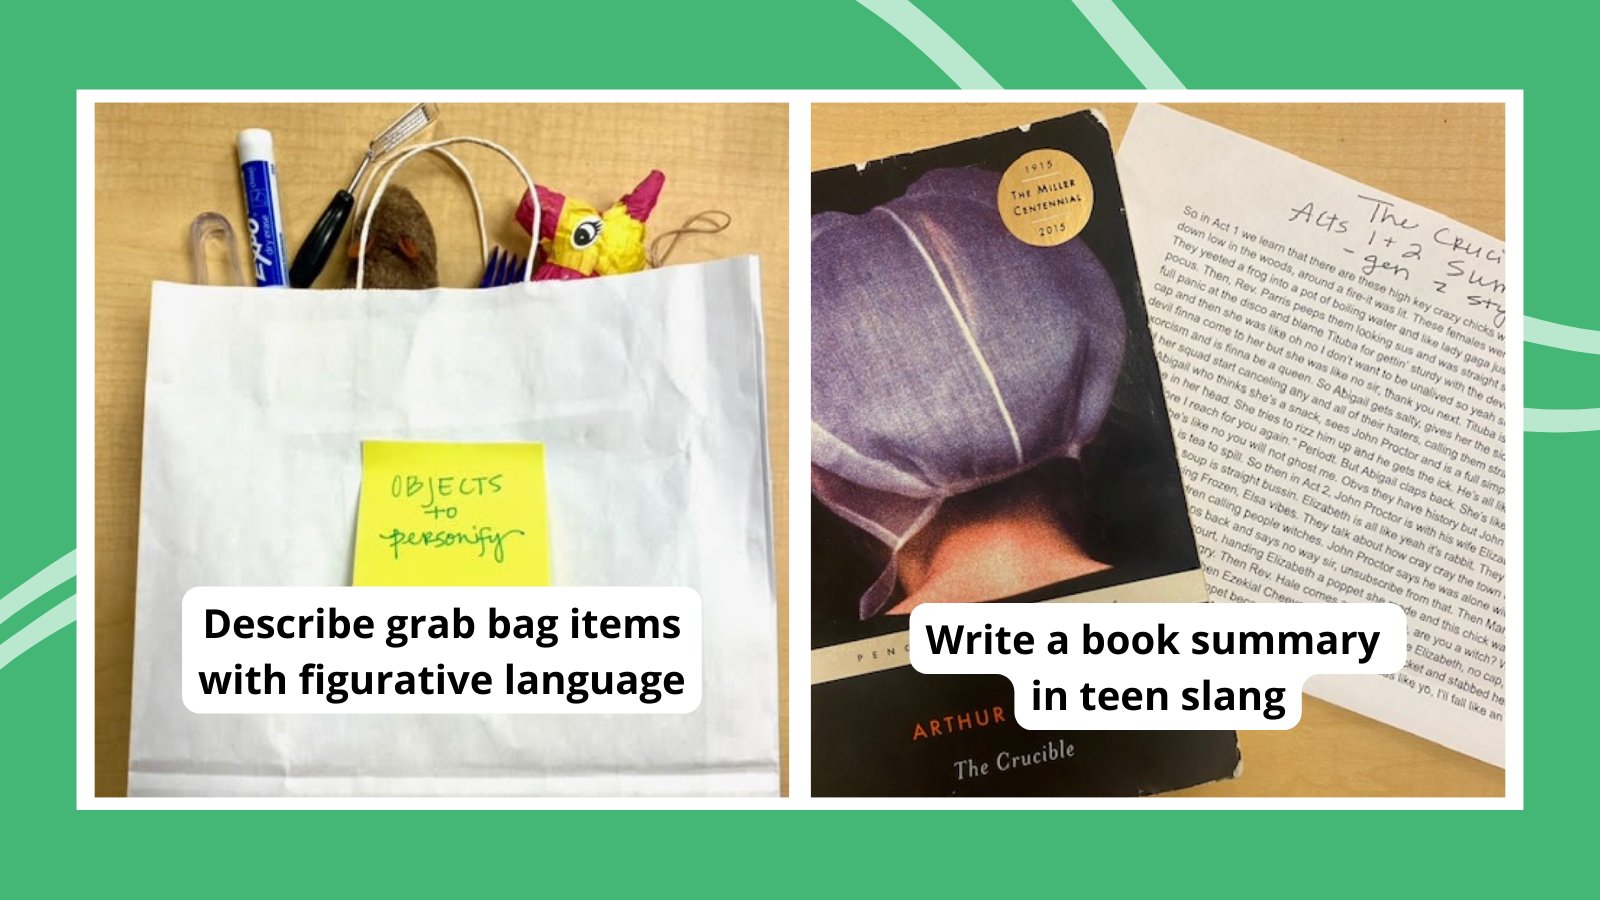 Examples of high school English activities, including teen slang summary of the Crucible and grab bag of objects to personify.